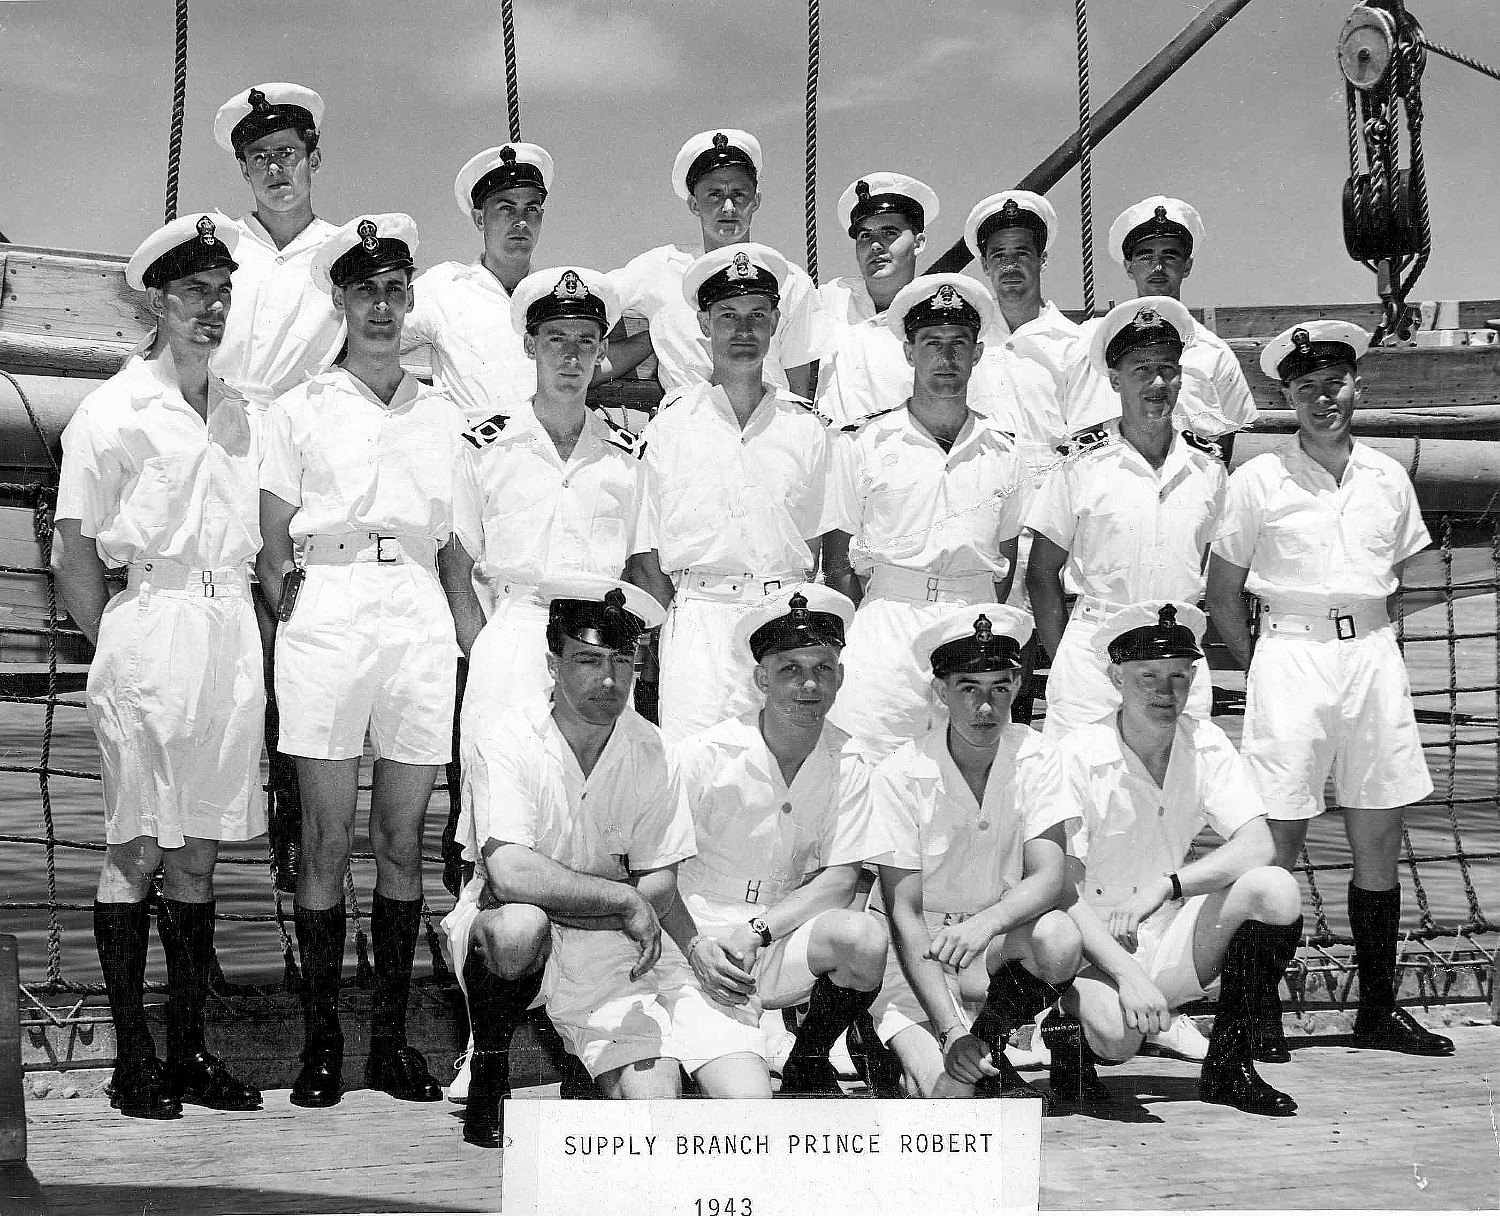 Royal Canadian Navy : HMCS Prince Robert, Supply Branch, Officers and Petty Officers